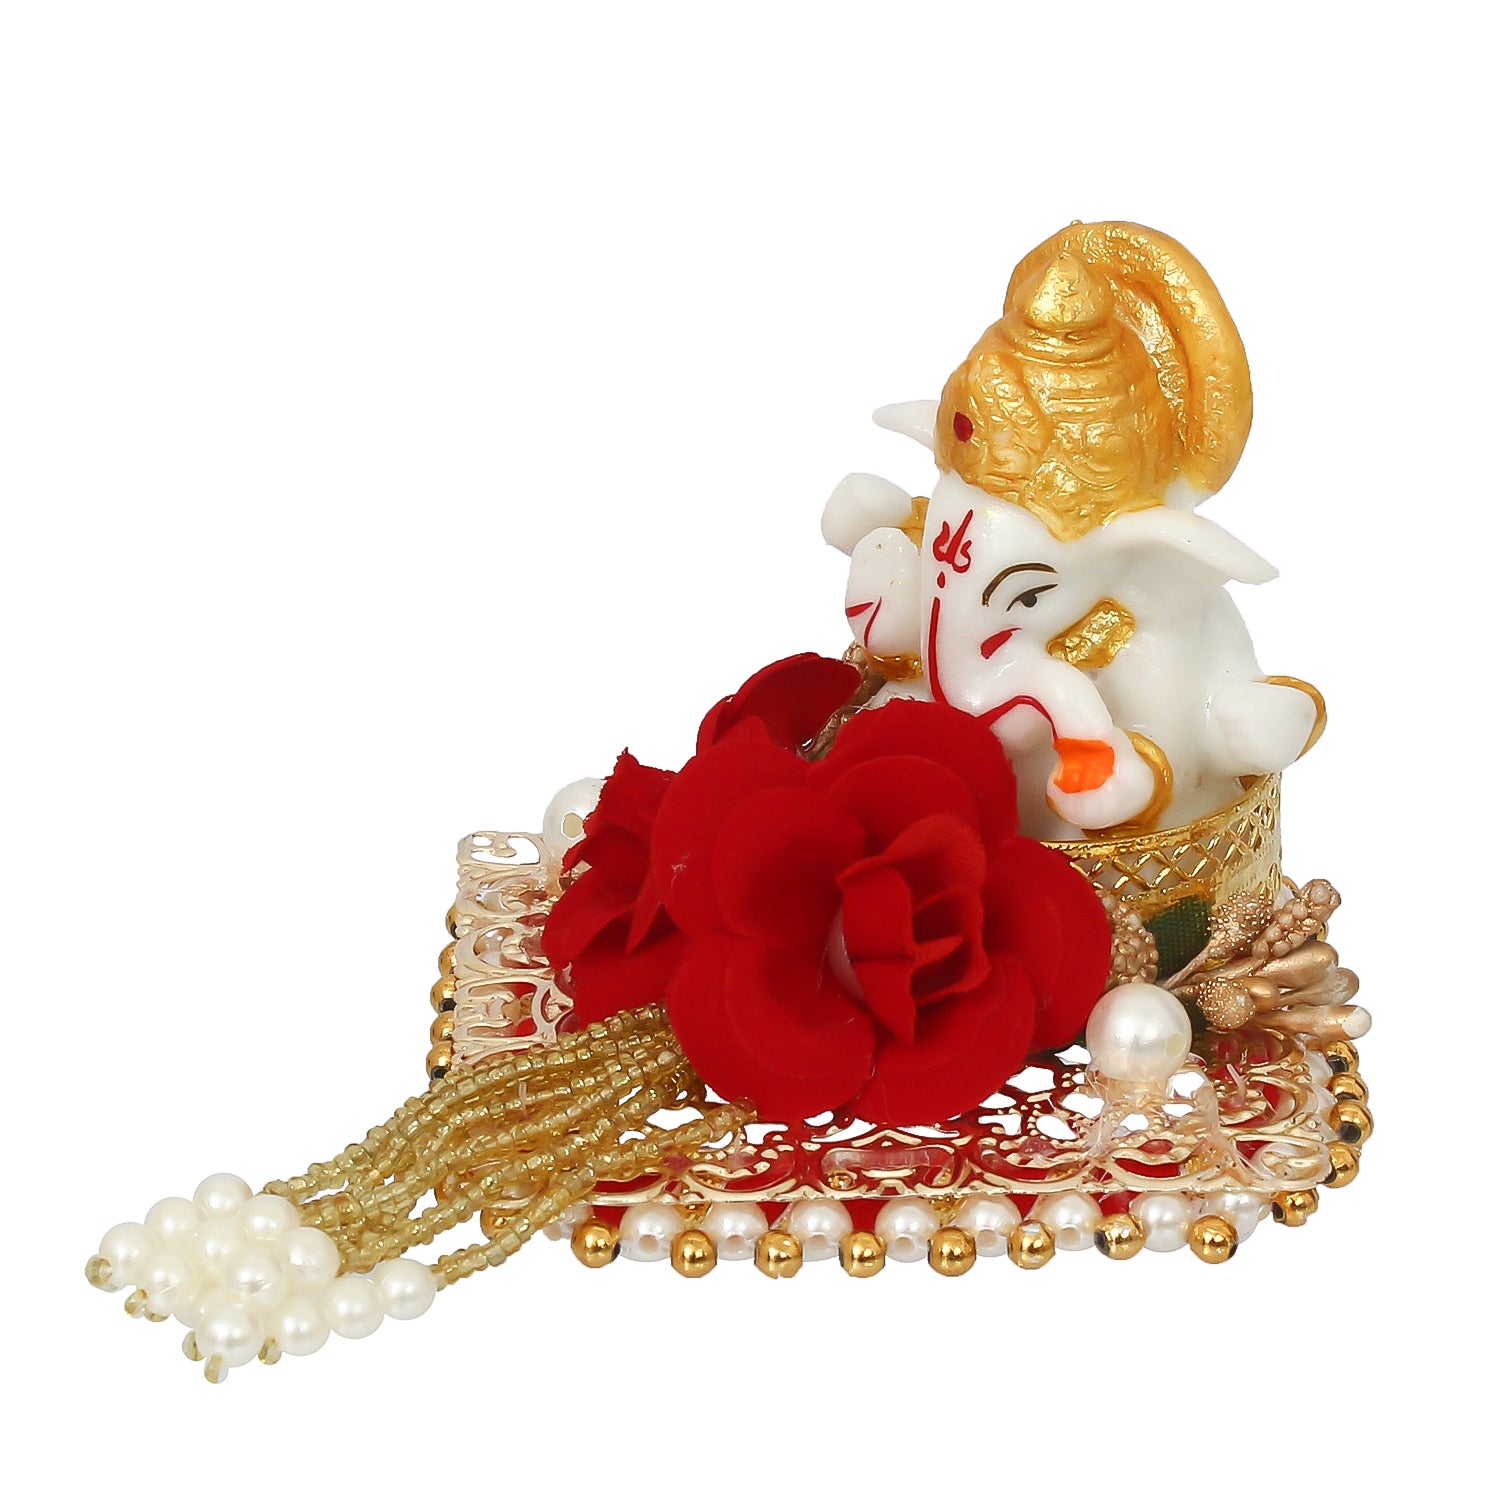 Polyresin Lord Ganesha Idol on Decorative Handcrafted Plate for Home and Car Dashboard 4